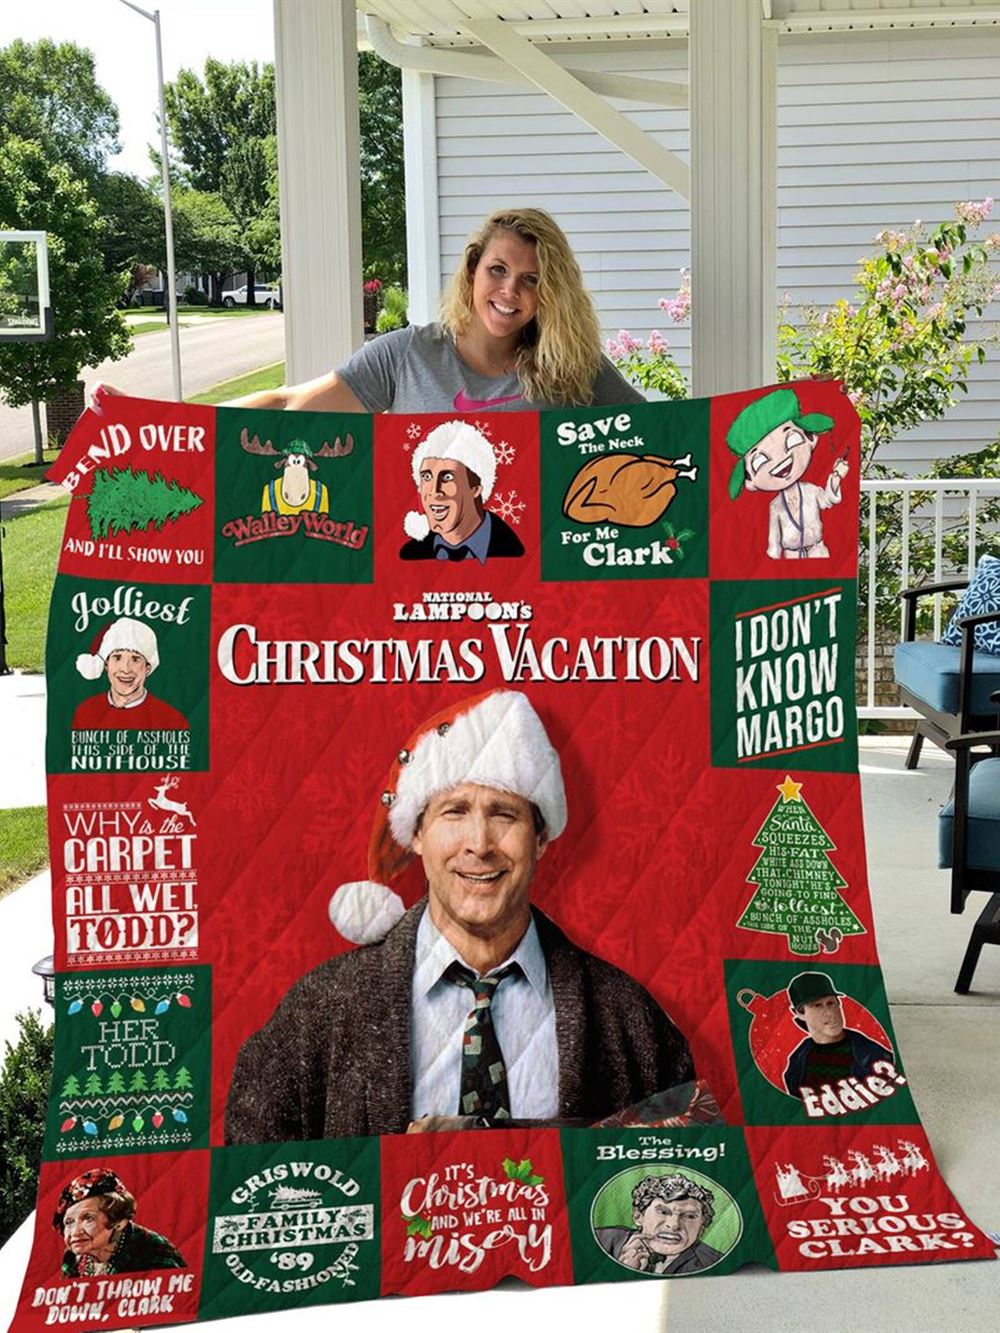 National Lampoons Christmas Vacation Fleece Blanket Clark Griswold Throw Blanket For Bed Couch Sofa Christmas Gifts Ep0rt